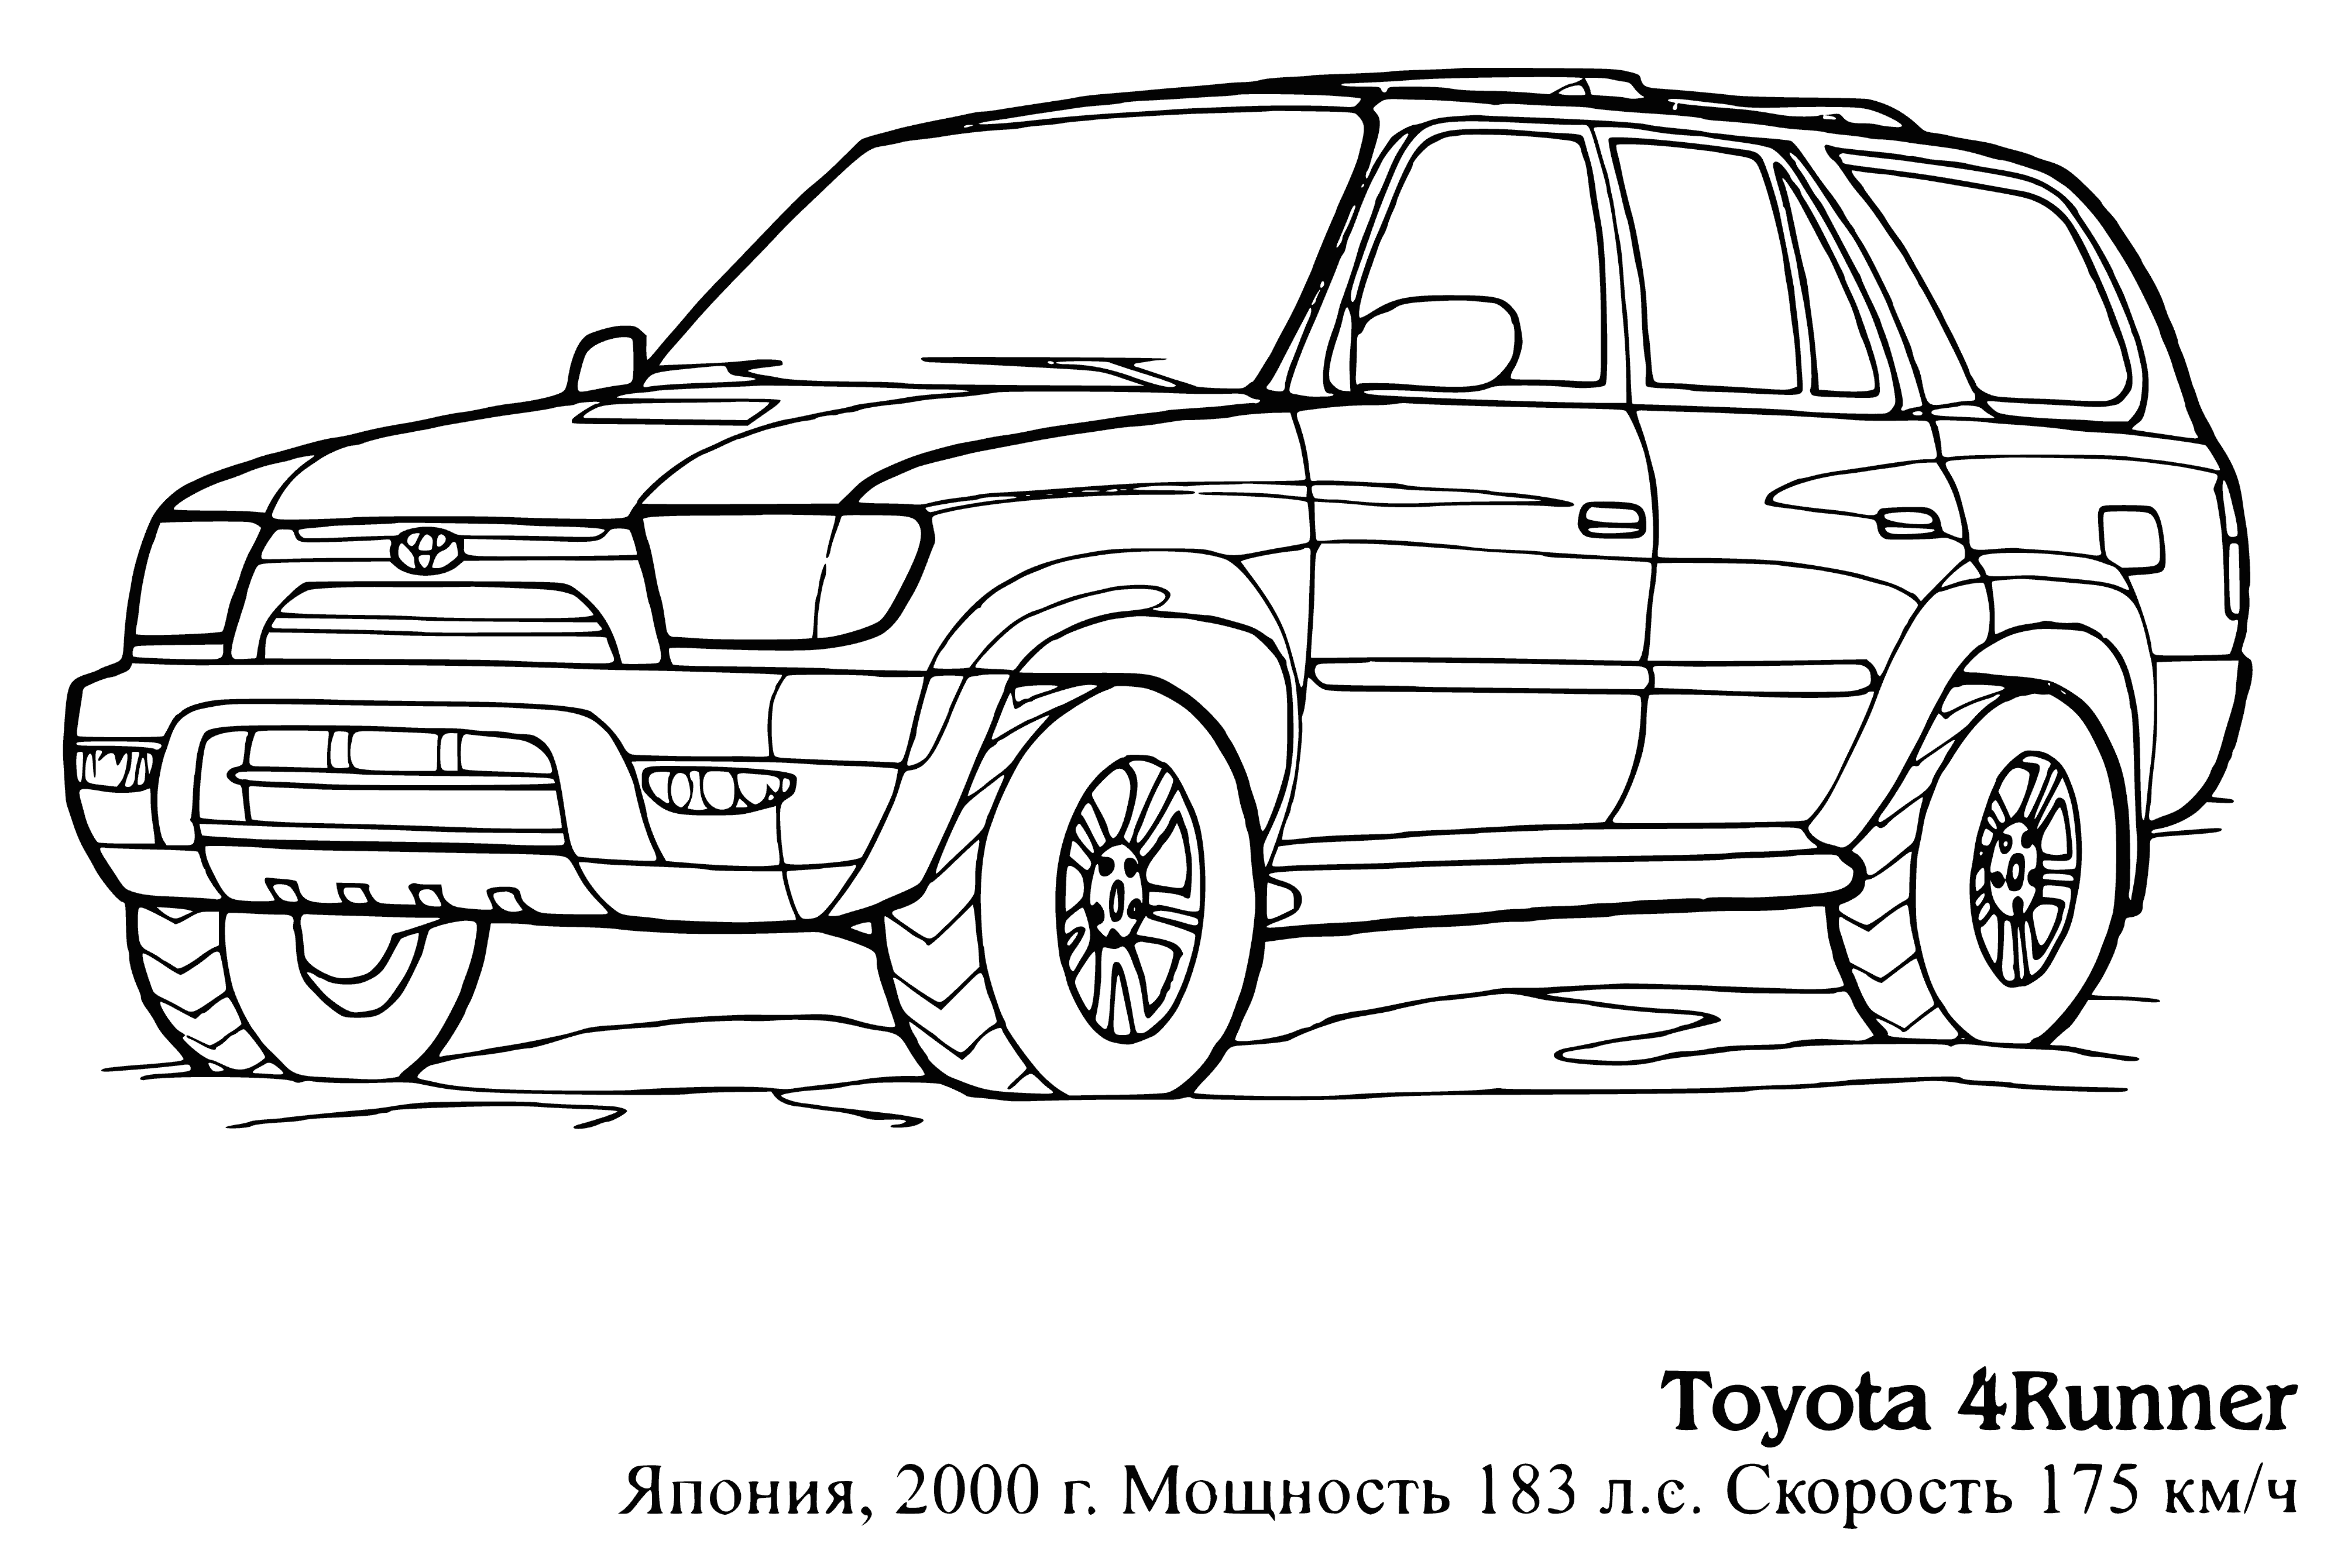 Toyota 4Runner coloring page